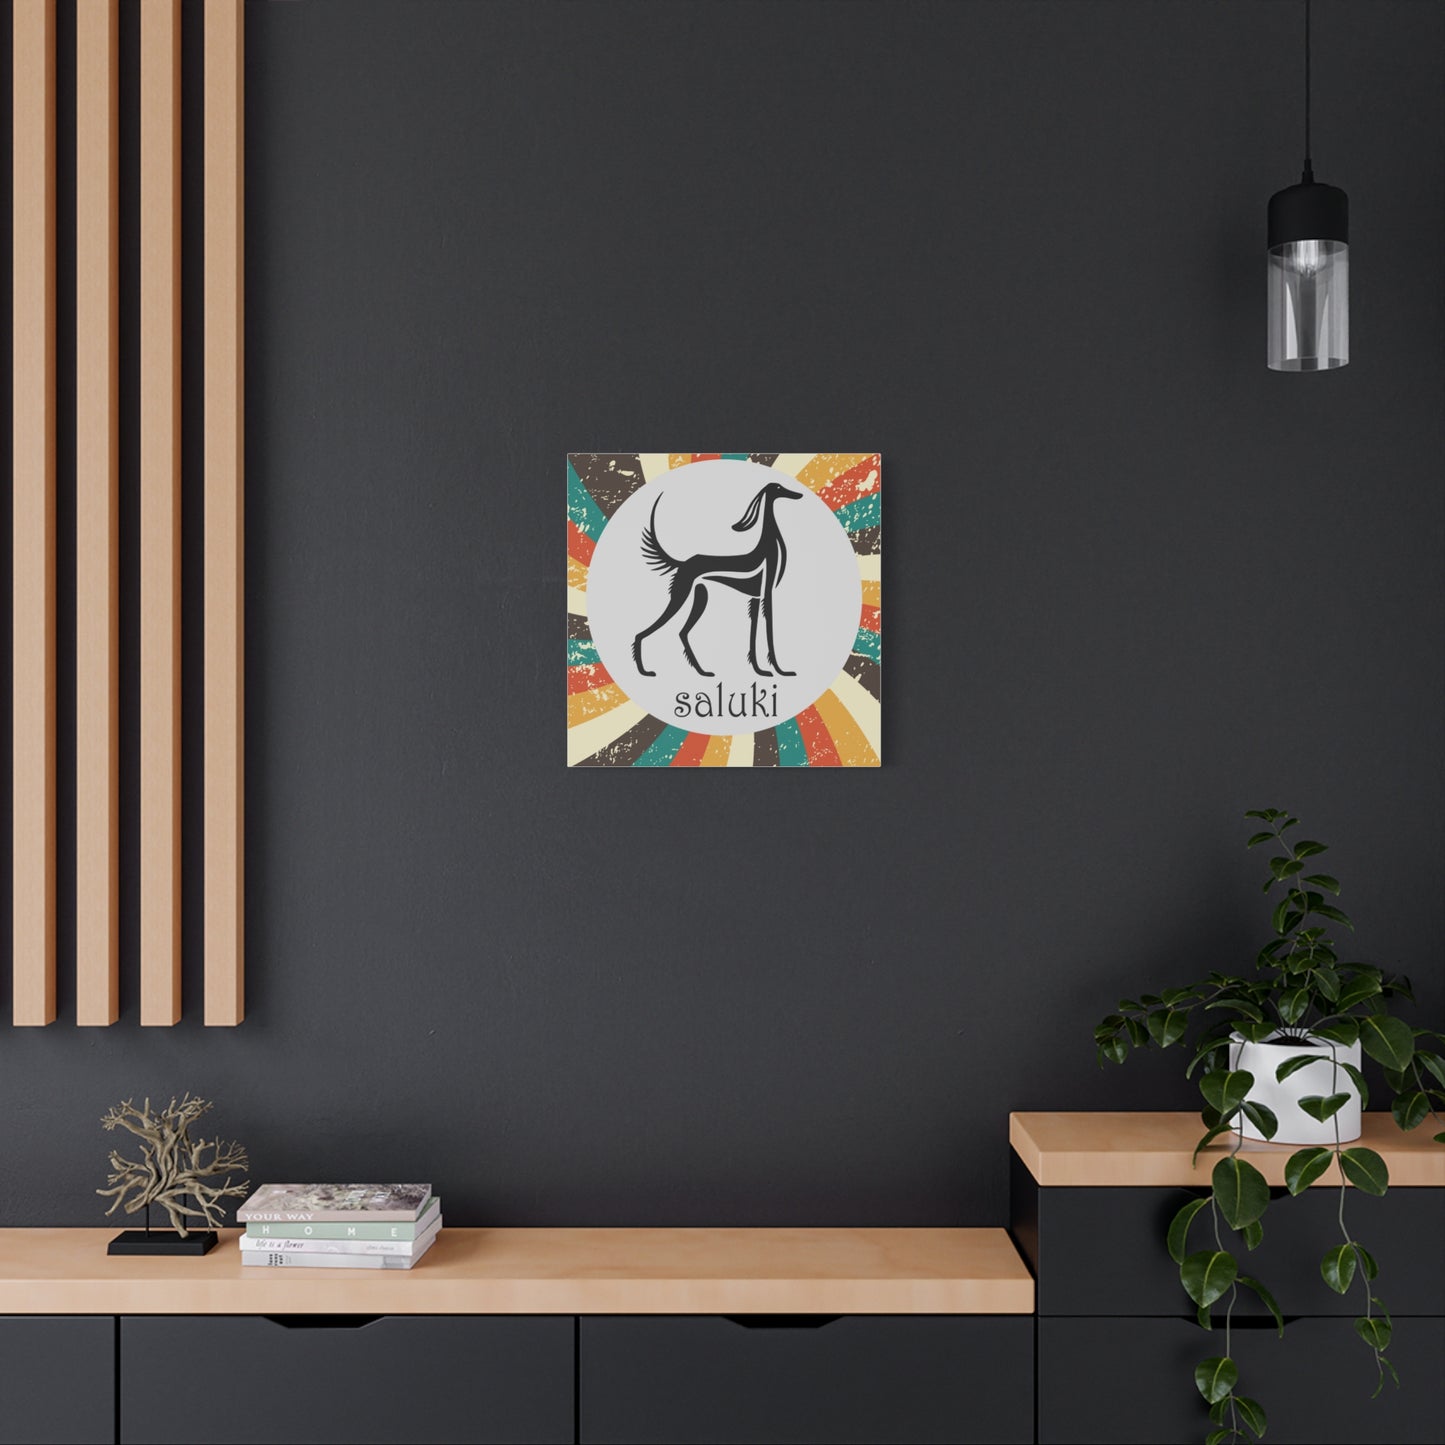 SALUKI ART IN A STYLISTIC ART STYLE on a Matte Canvas, Stretched, 1.25"